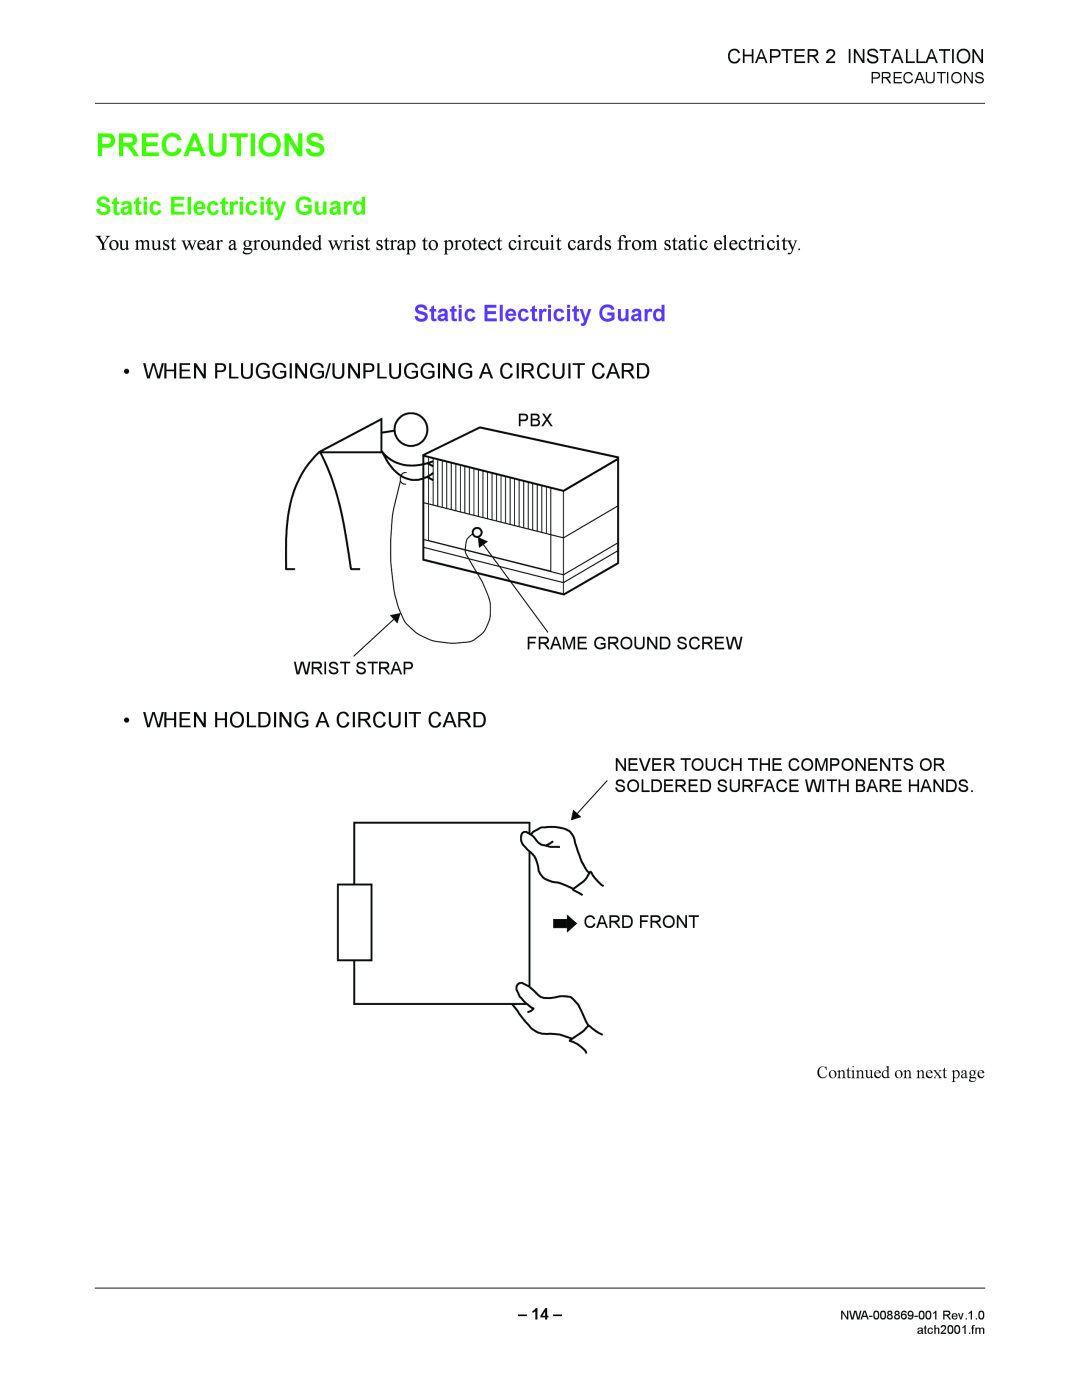 NEC manual Precautions, Static Electricity Guard, Installation, Continued on next page, NWA-008869-001 Rev.1.0 